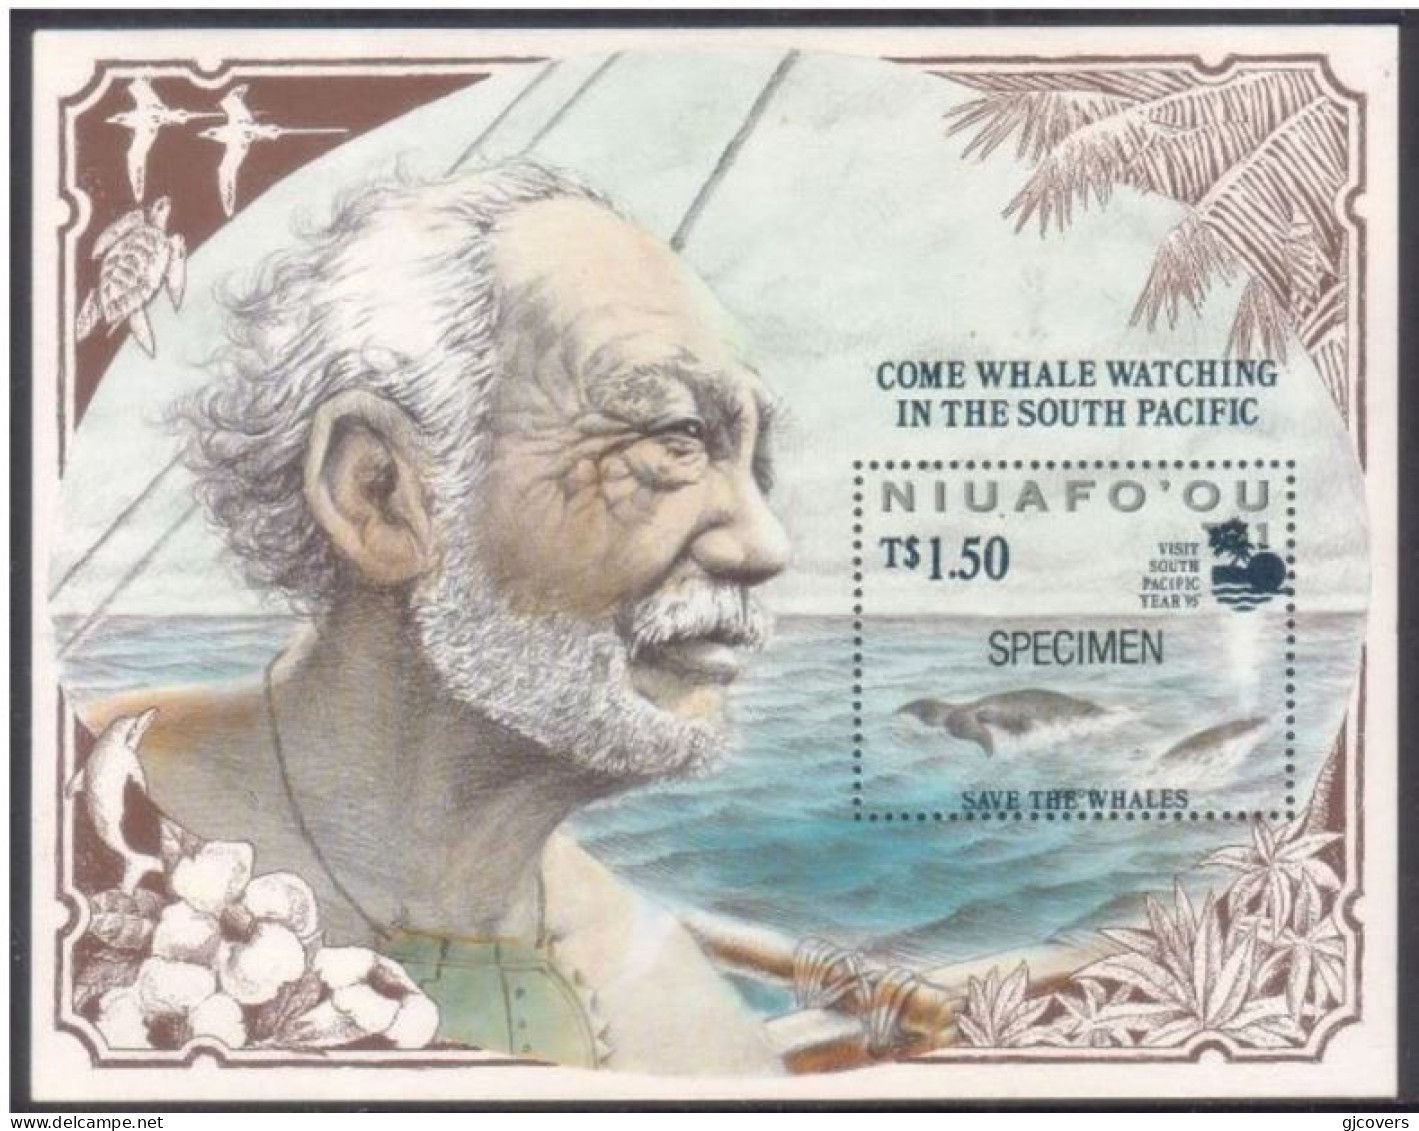 Tonga Niuafo'ou 1995 S/S  - Ovpt "Come Whale Watching" & "Save The Whales" Specimen - Wale